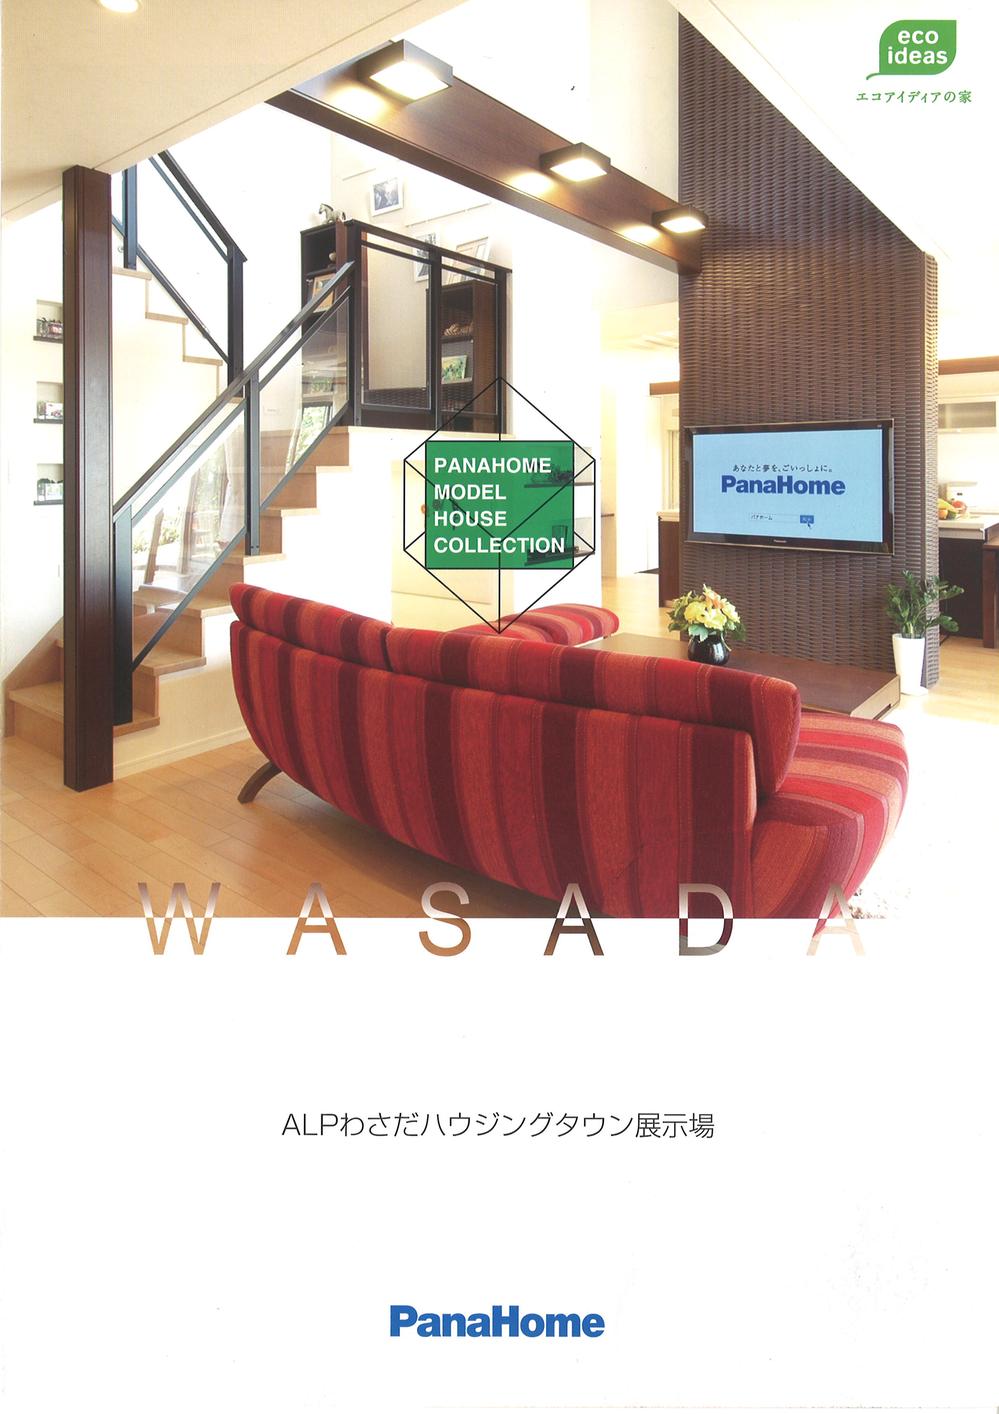 Other. ALP Wasada housing Town exhibition hall ← nearest exhibition hall here TEL: 097-542-4845 Hours: AM10: 00 ~ 17:00 every week: fire ・ It closed on Wednesdays Date